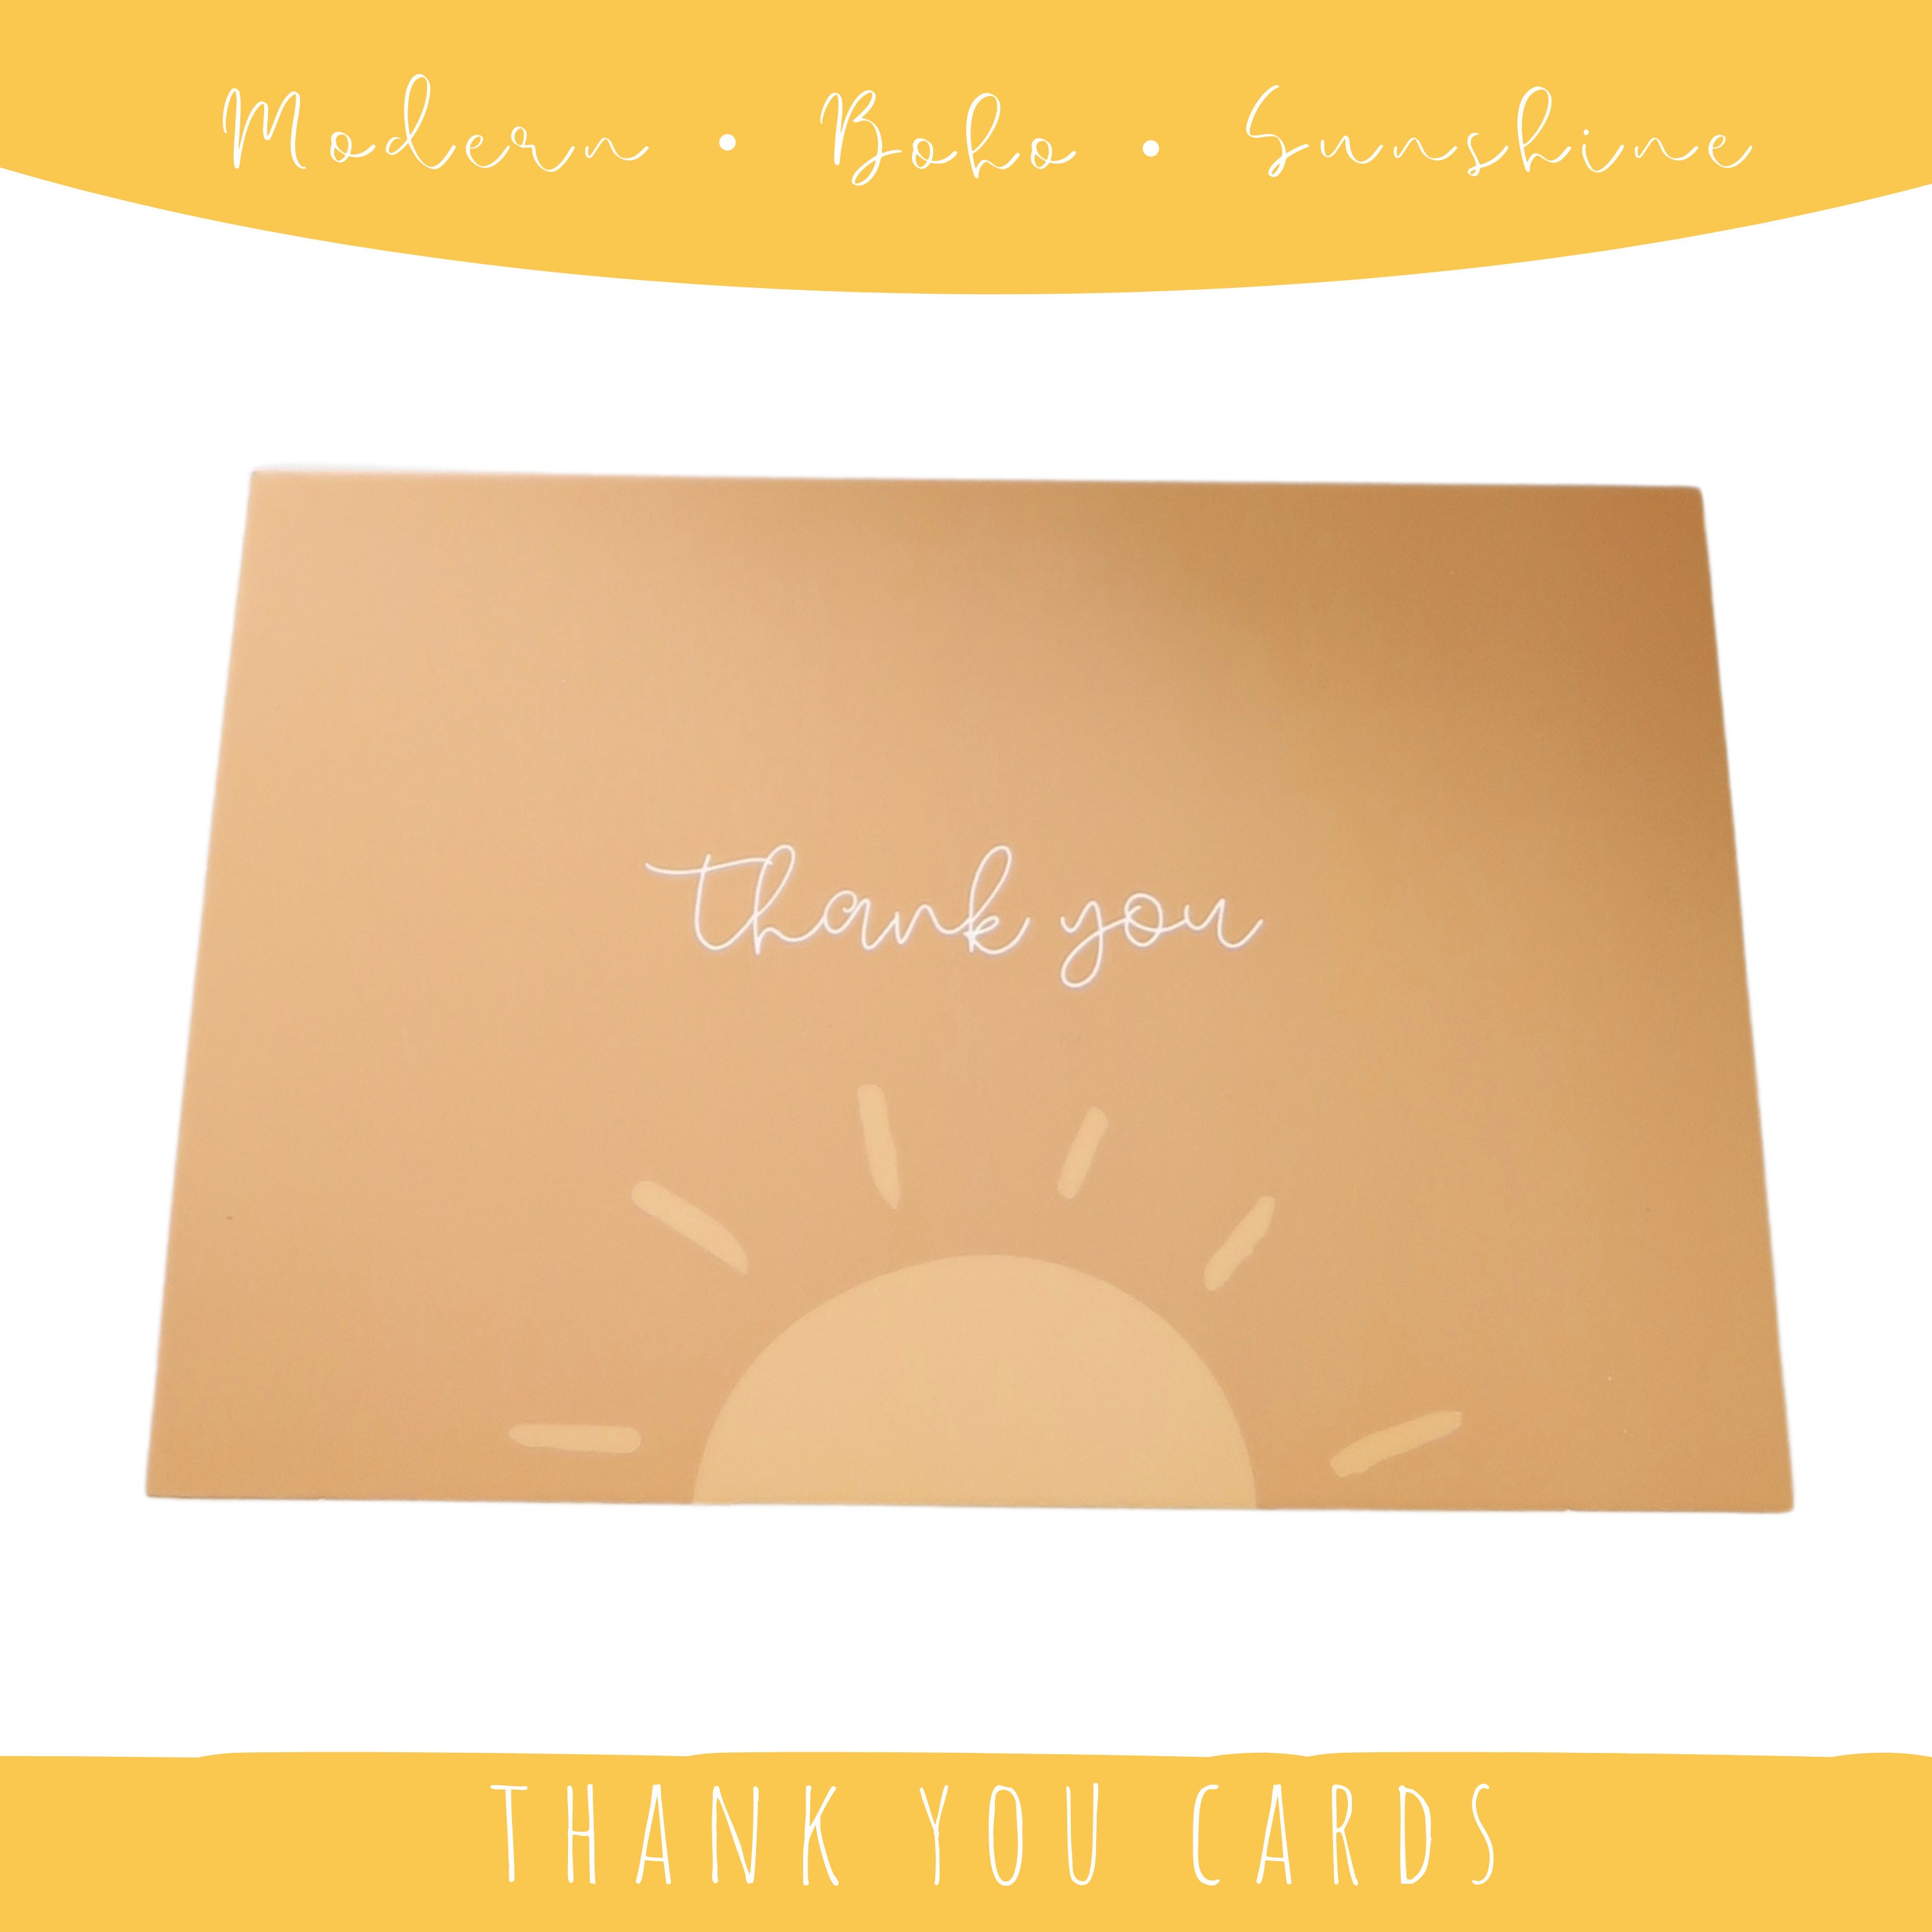 Boho Thank You Cards 30 Pack with White Envelopes Rainbow Baby Shower Boho Rainbow Party Supplies 4x6 Greeting Cards for Small Business